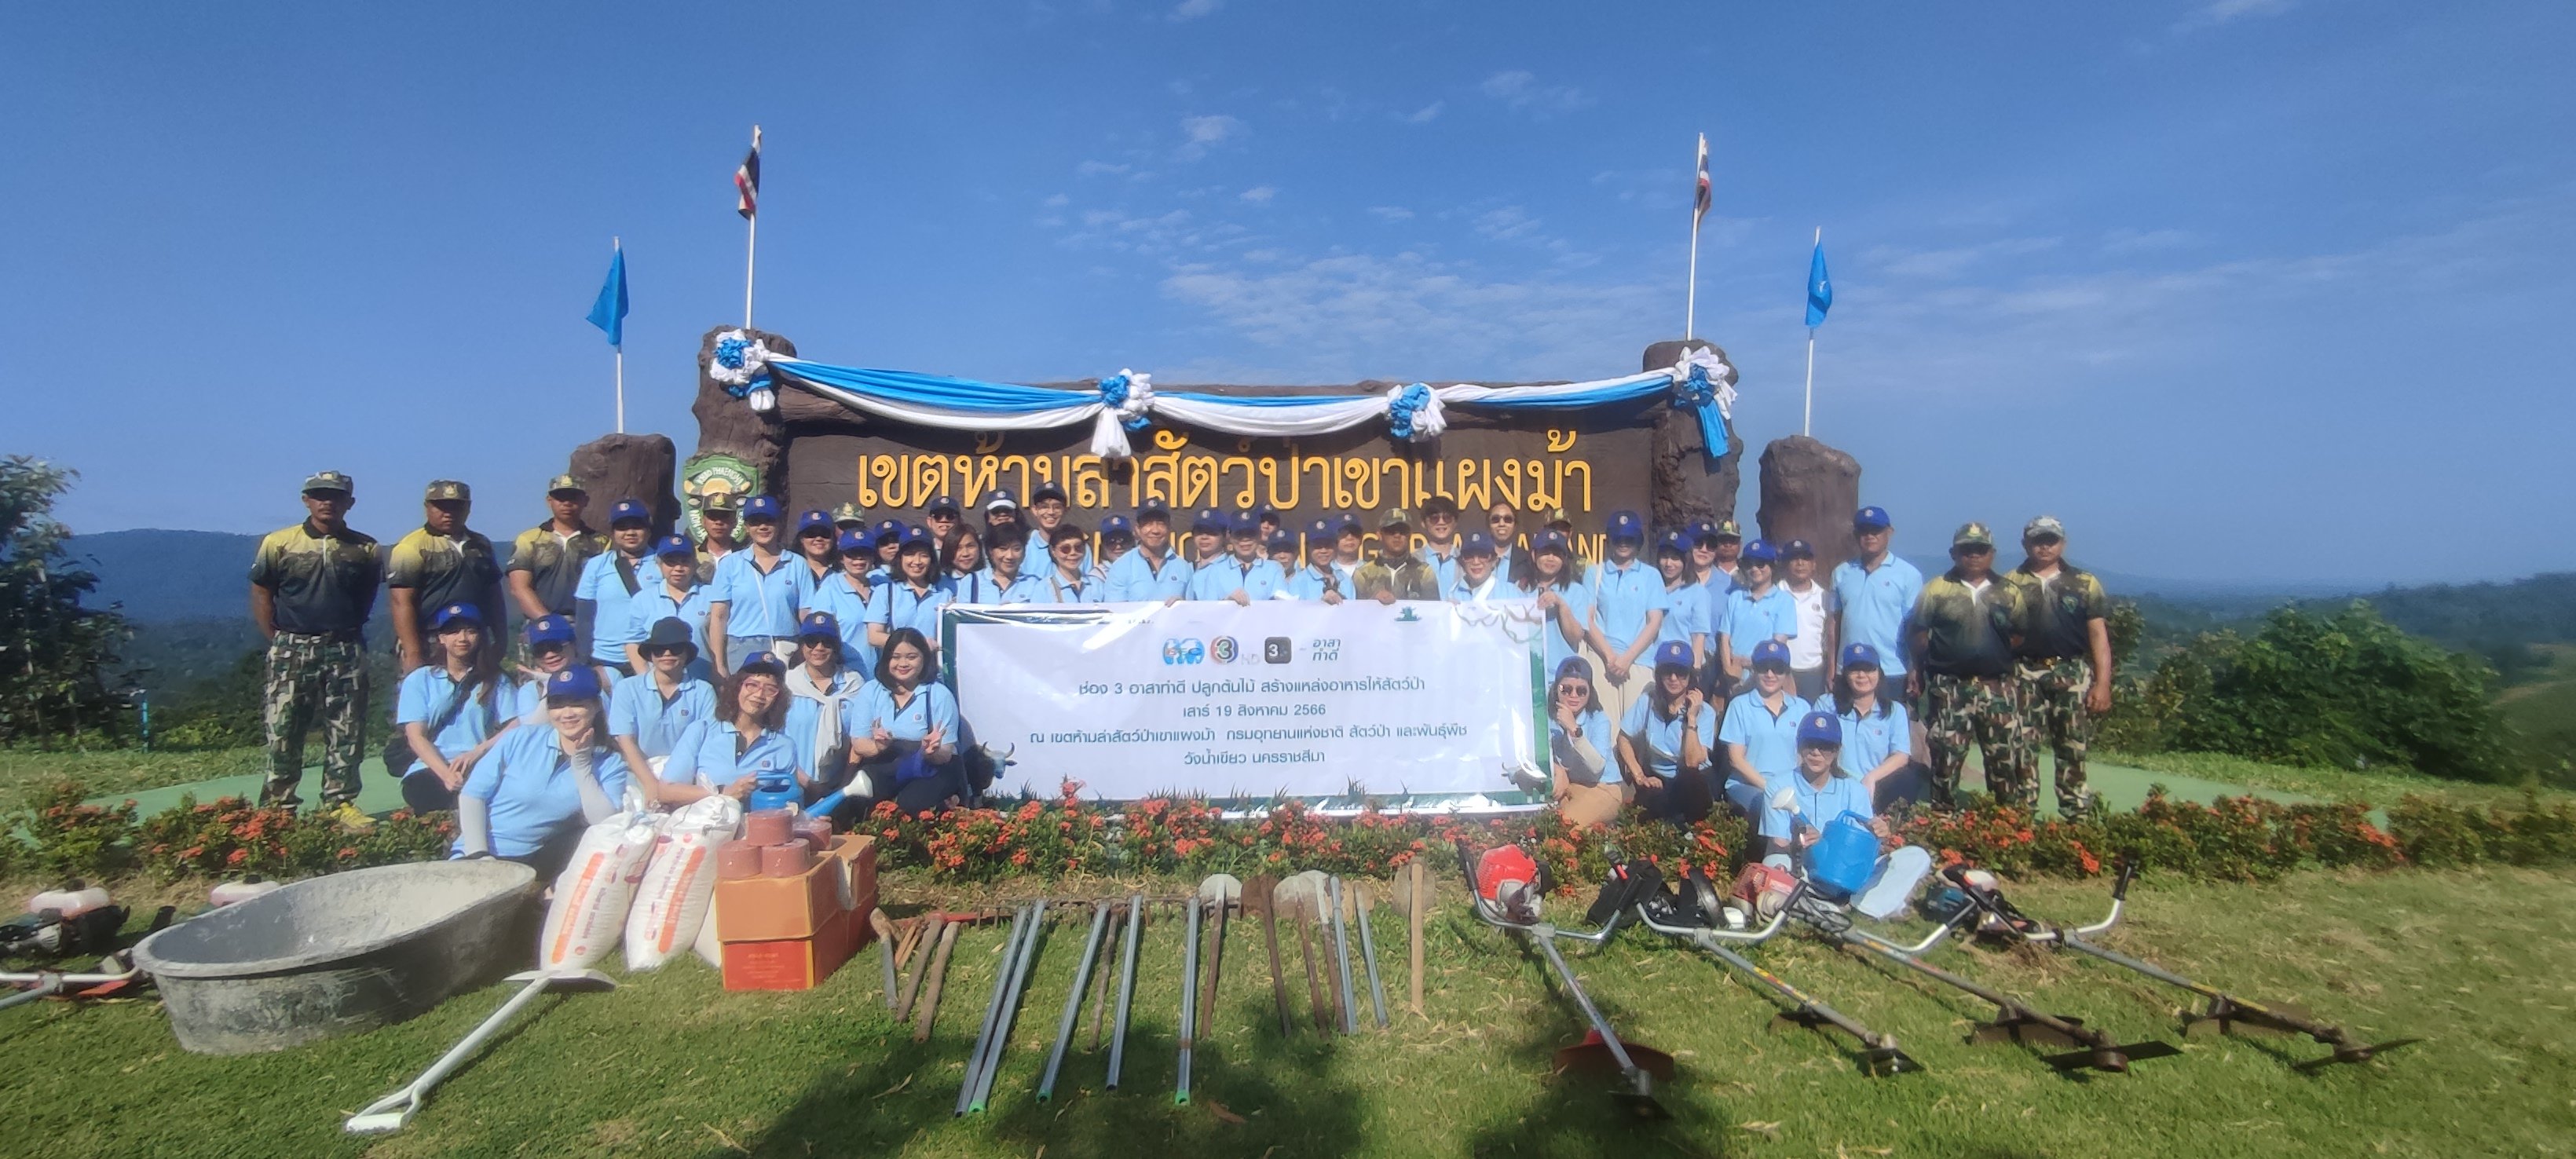 Channel 3 Staff Volunteers Cared for the Environment with Tree Planting and Making Saltlick and Wildlife Food Sources in Nakhon Ratchasima